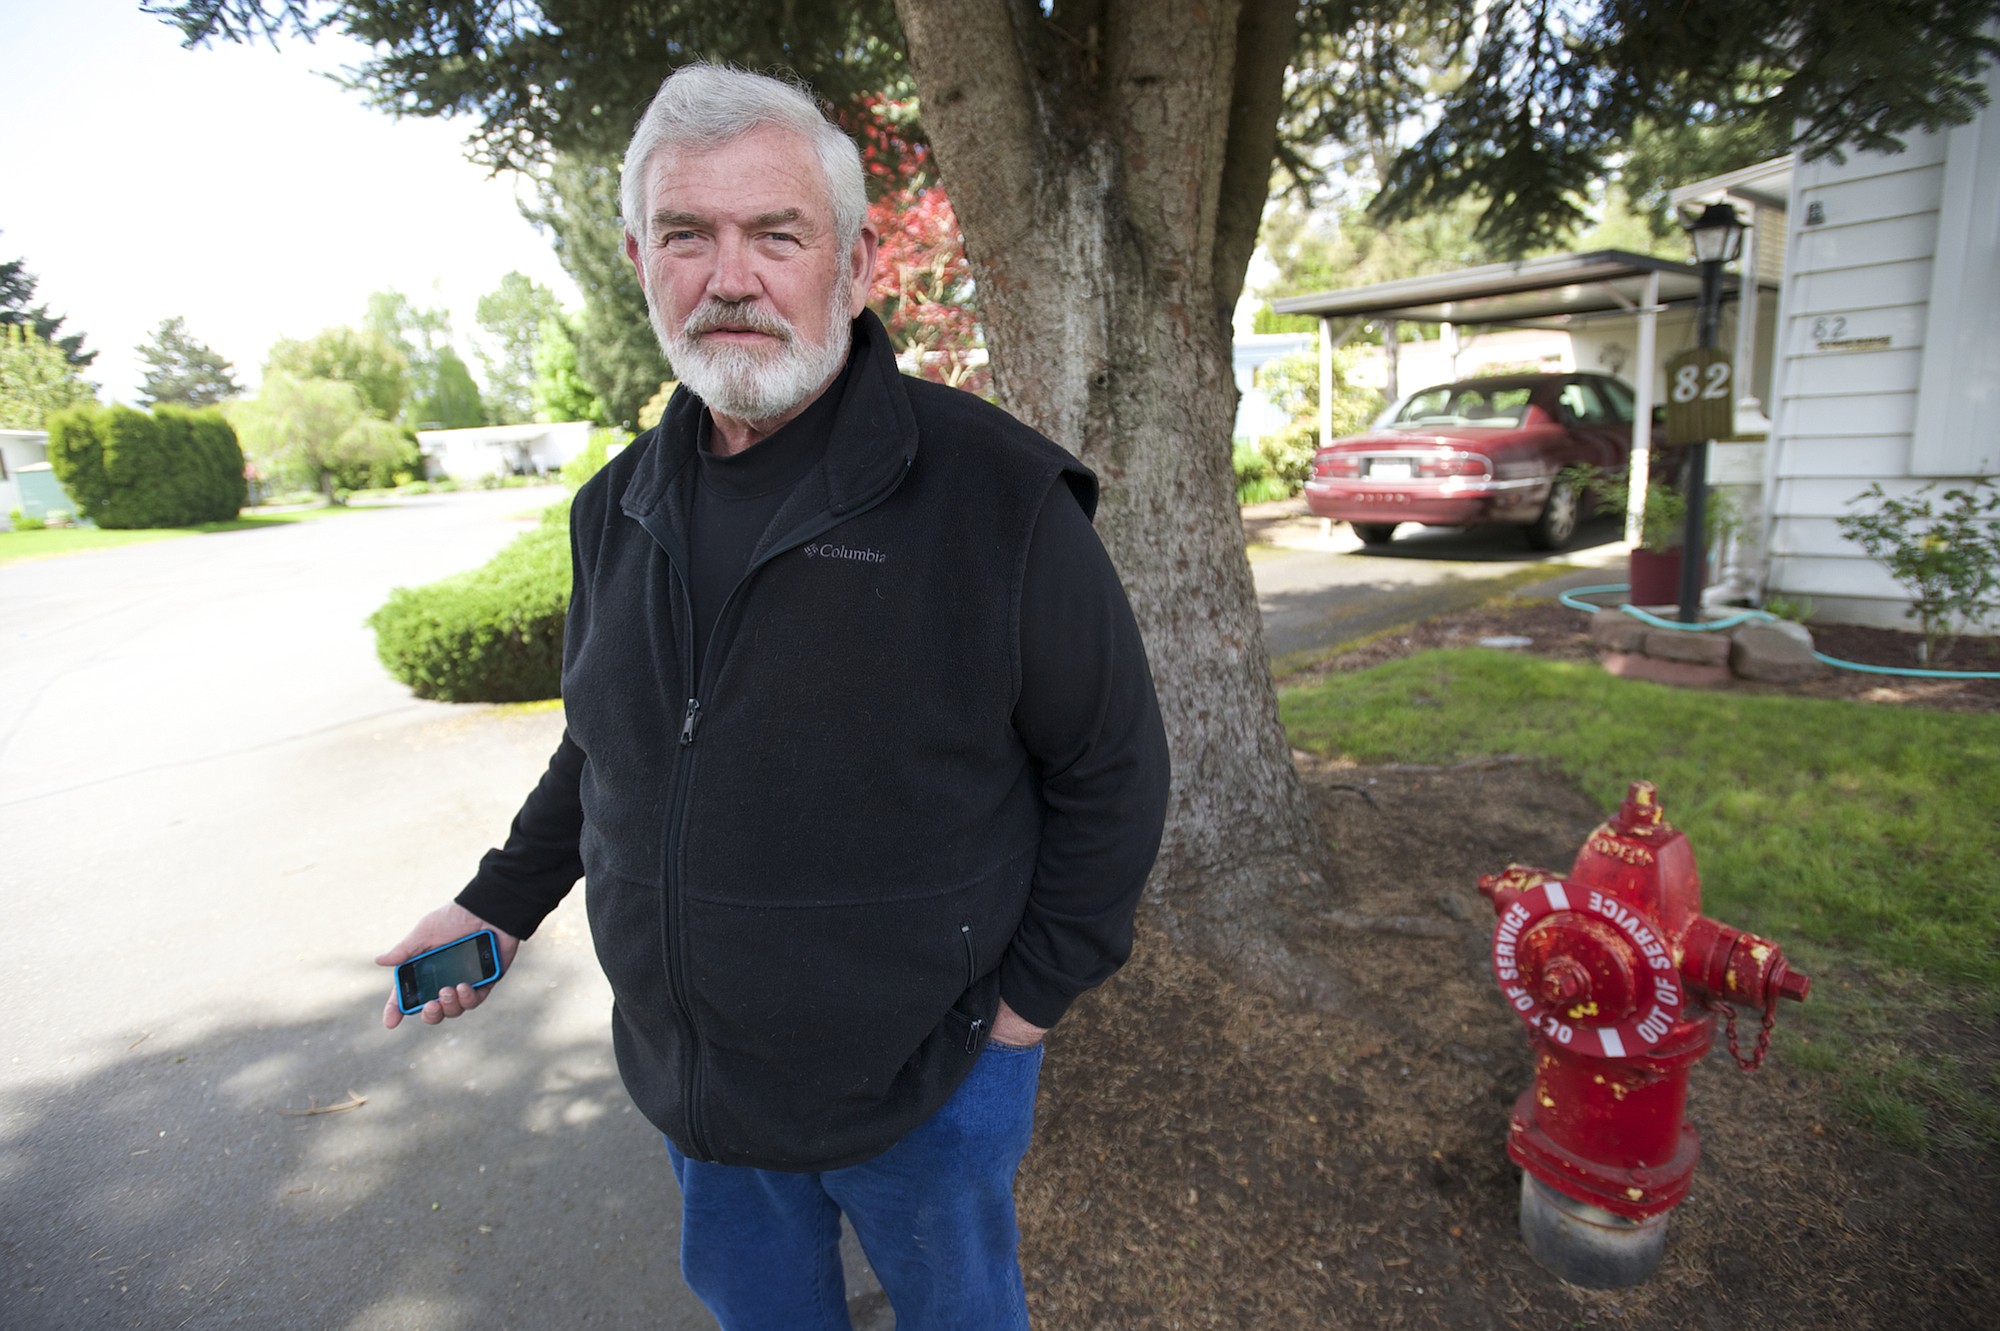 Dennis Toomey, a resident of Fair Oaks Estates, a senior living community in Vancouver, is worried about the lack of working fire hydrants at the property.